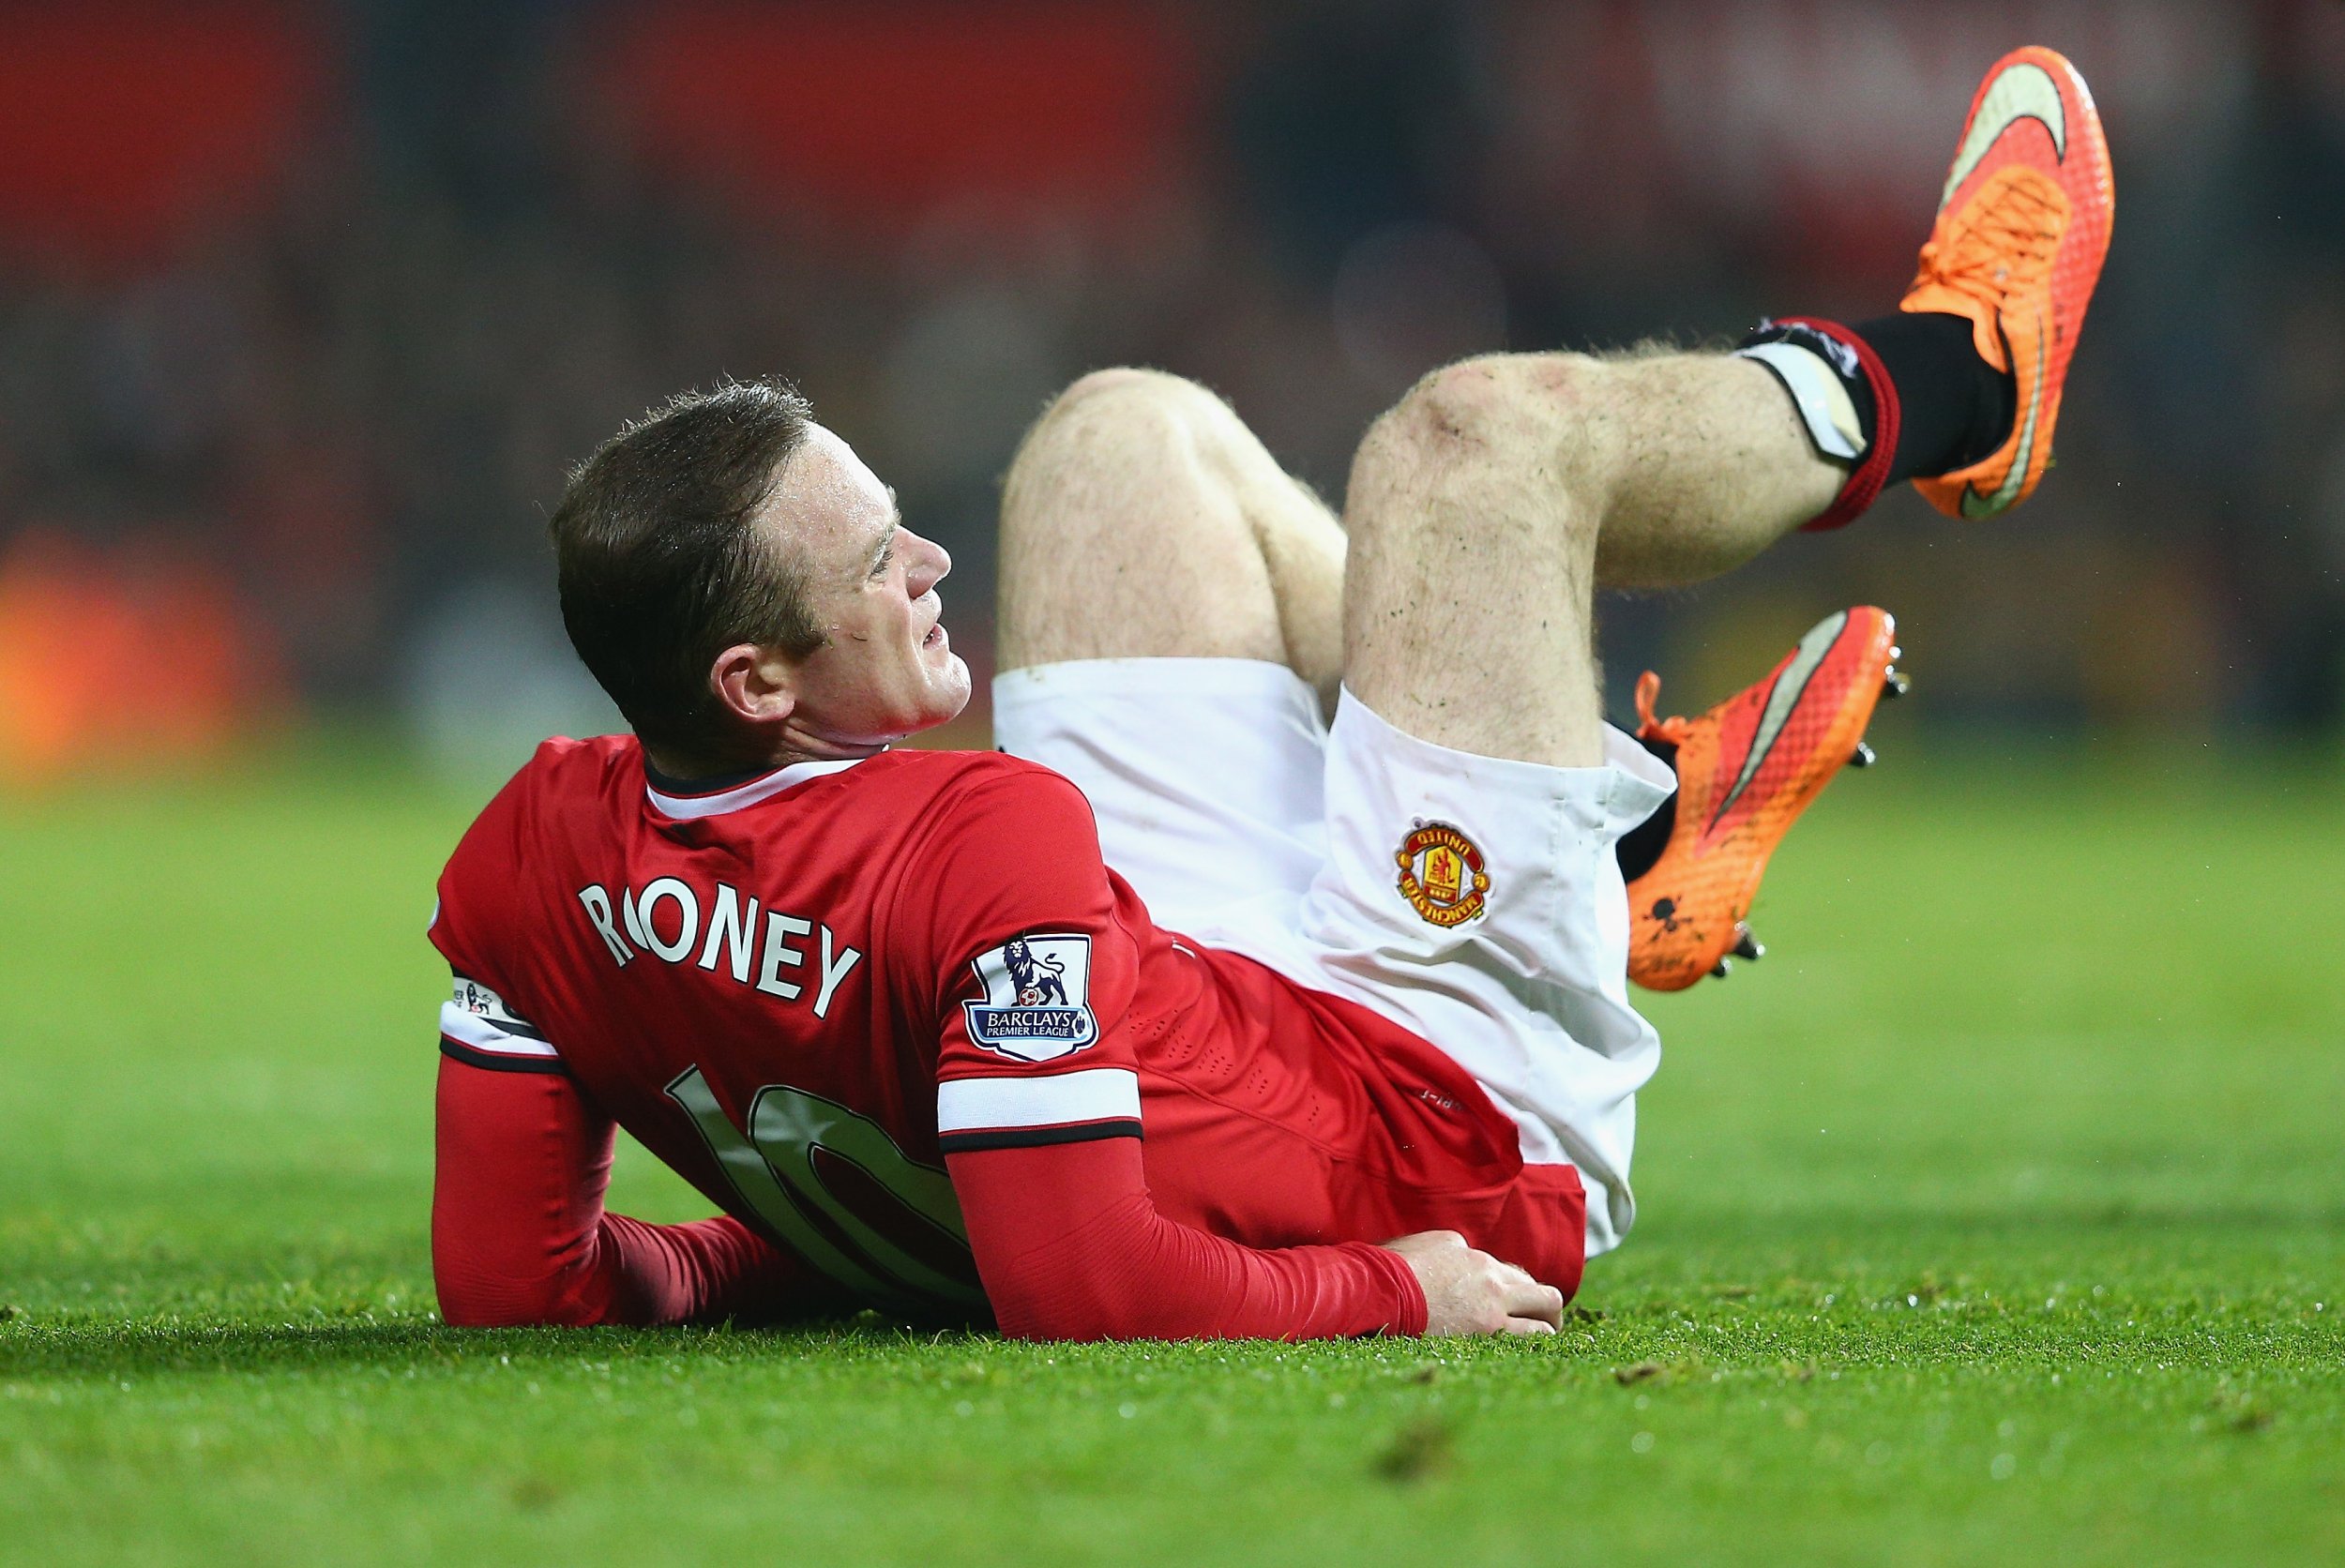 Manchester United captain Wayne Rooney may be out for two months with injury.